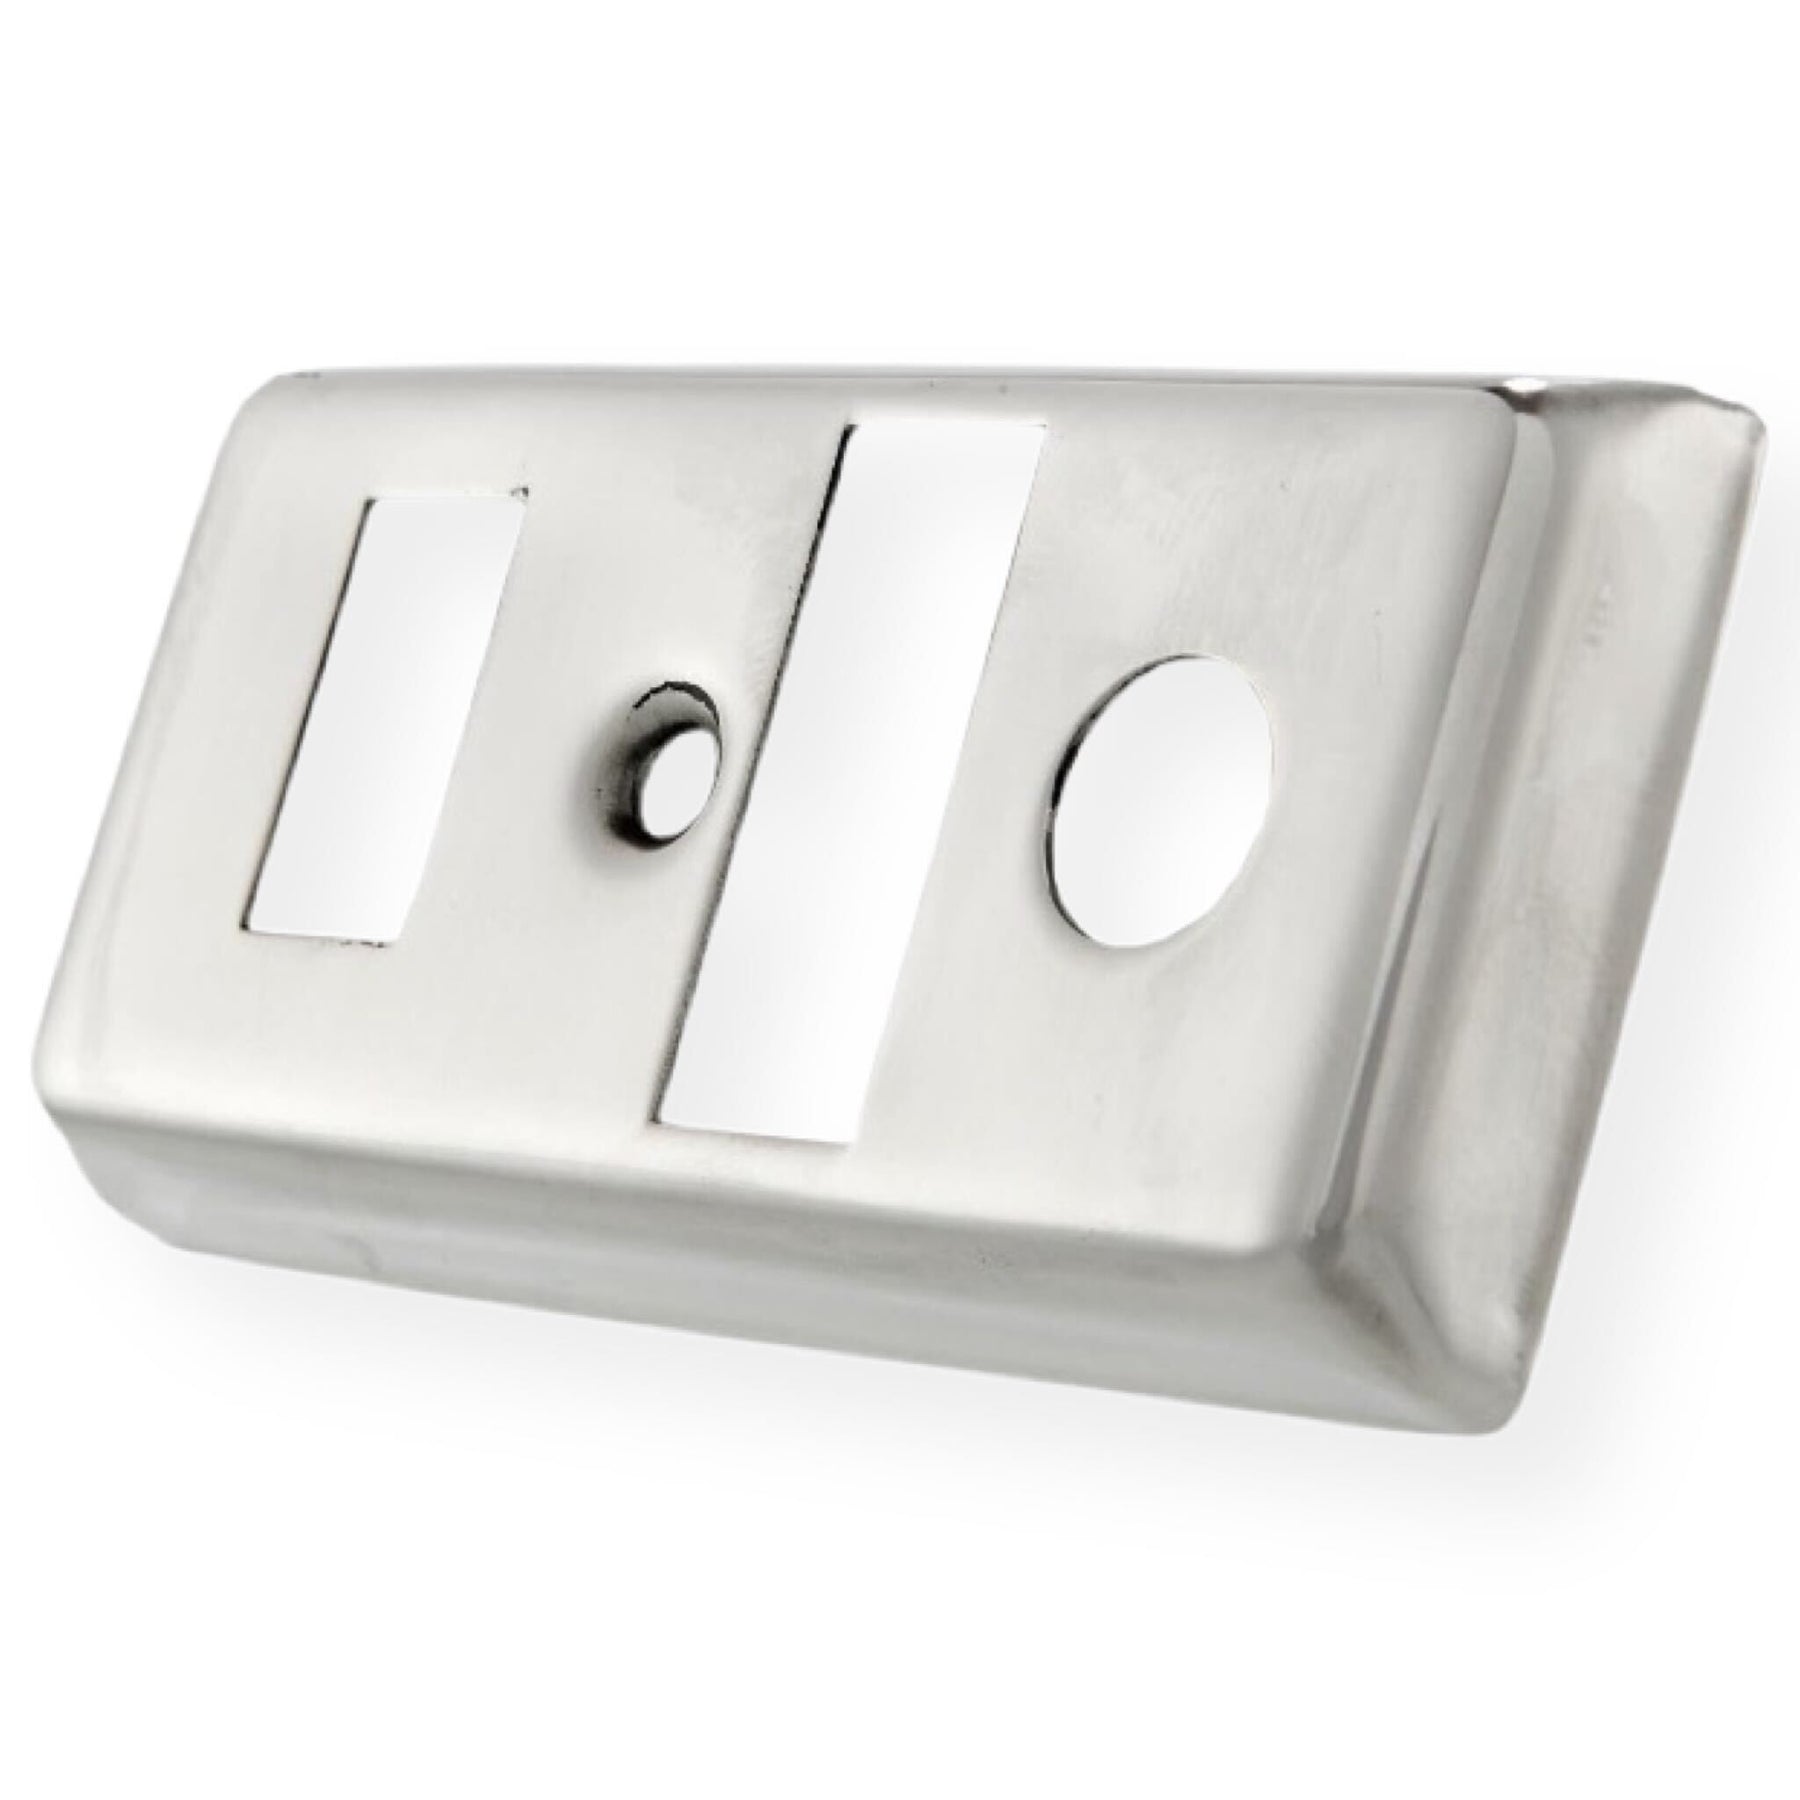 Vespa P125 P150X P200E Light Switch Cover - Polished Stainless Steel